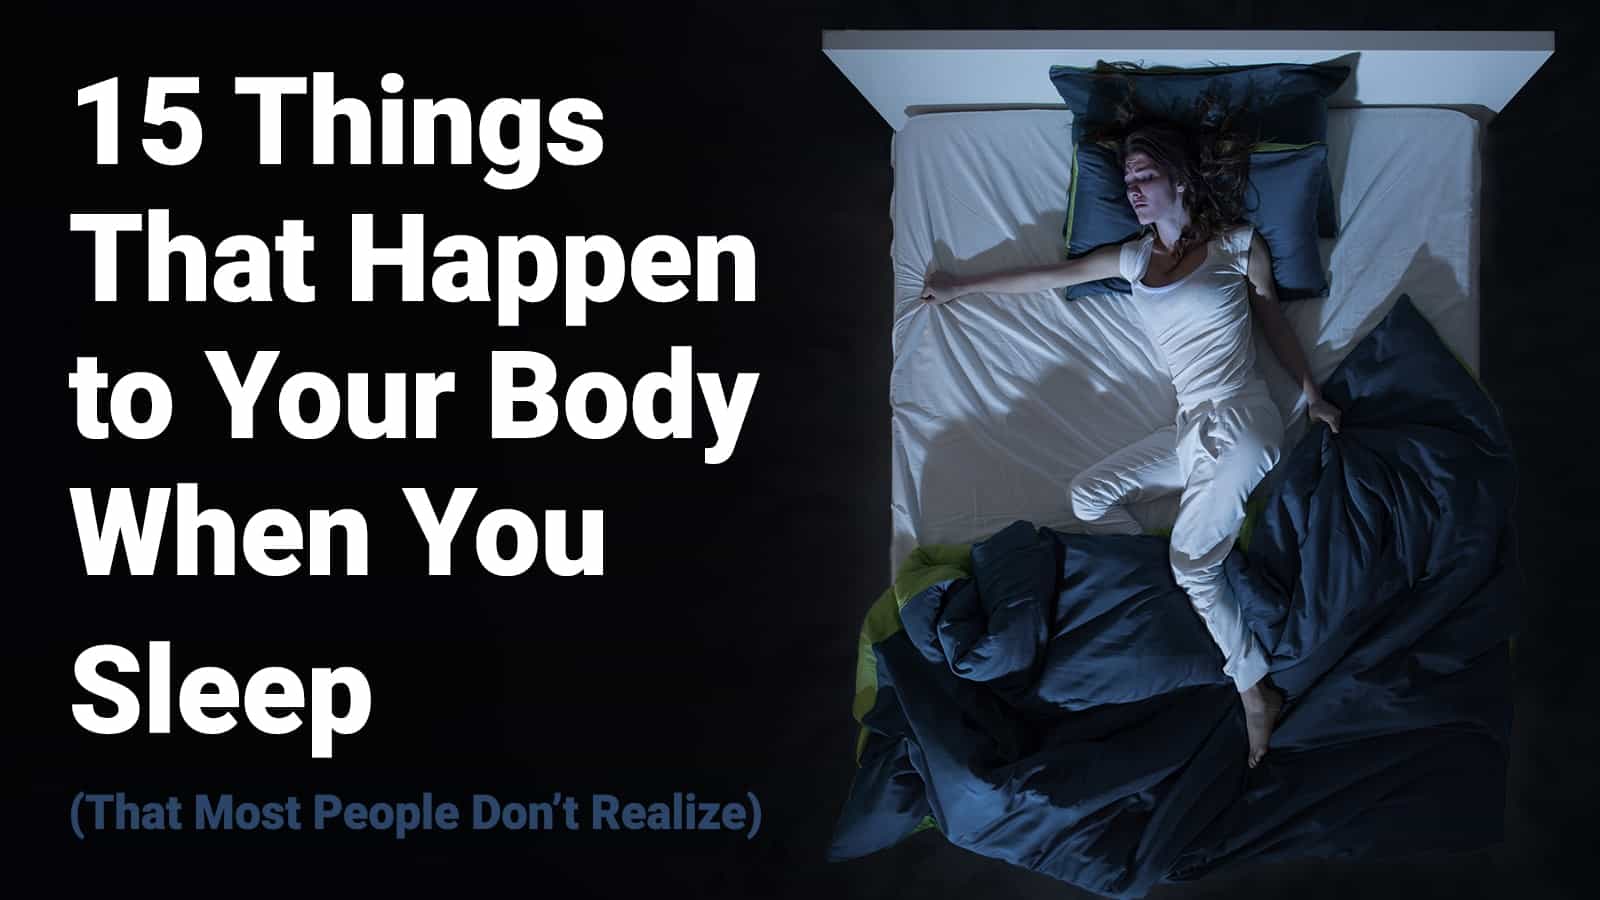 15 Things That Happen to Your Body When You Sleep (That Most People Don’t Realize)